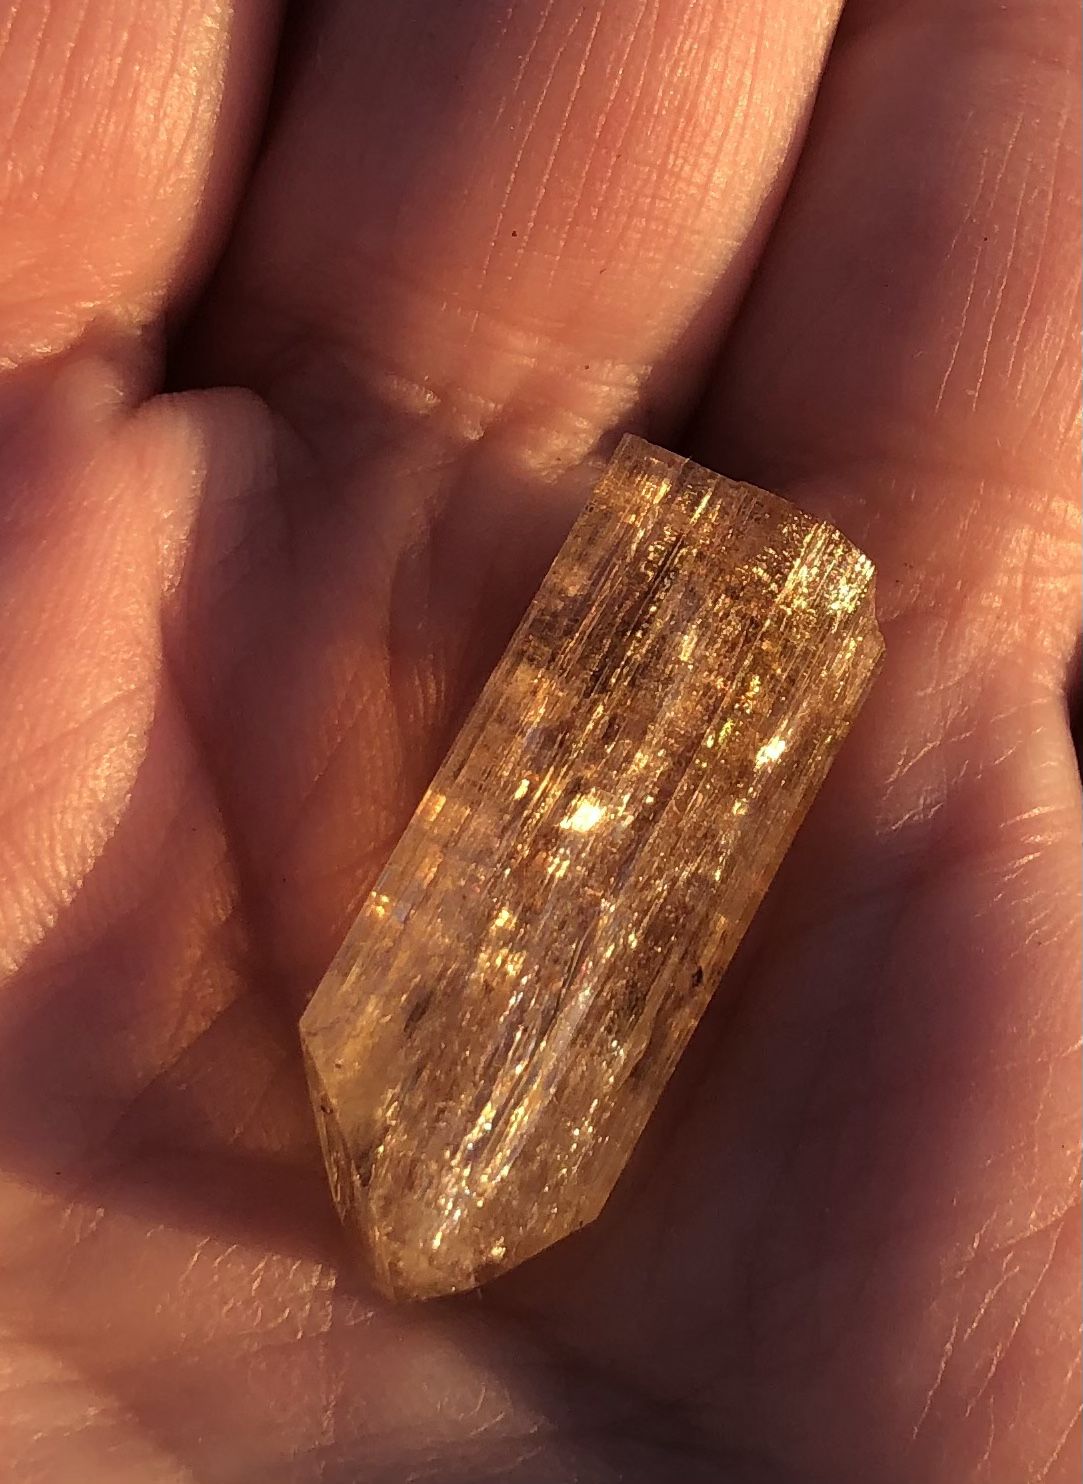 Beautiful 20 TCW Imperial Topaz Brazil Ouro Preto Crystal Rough Loose M